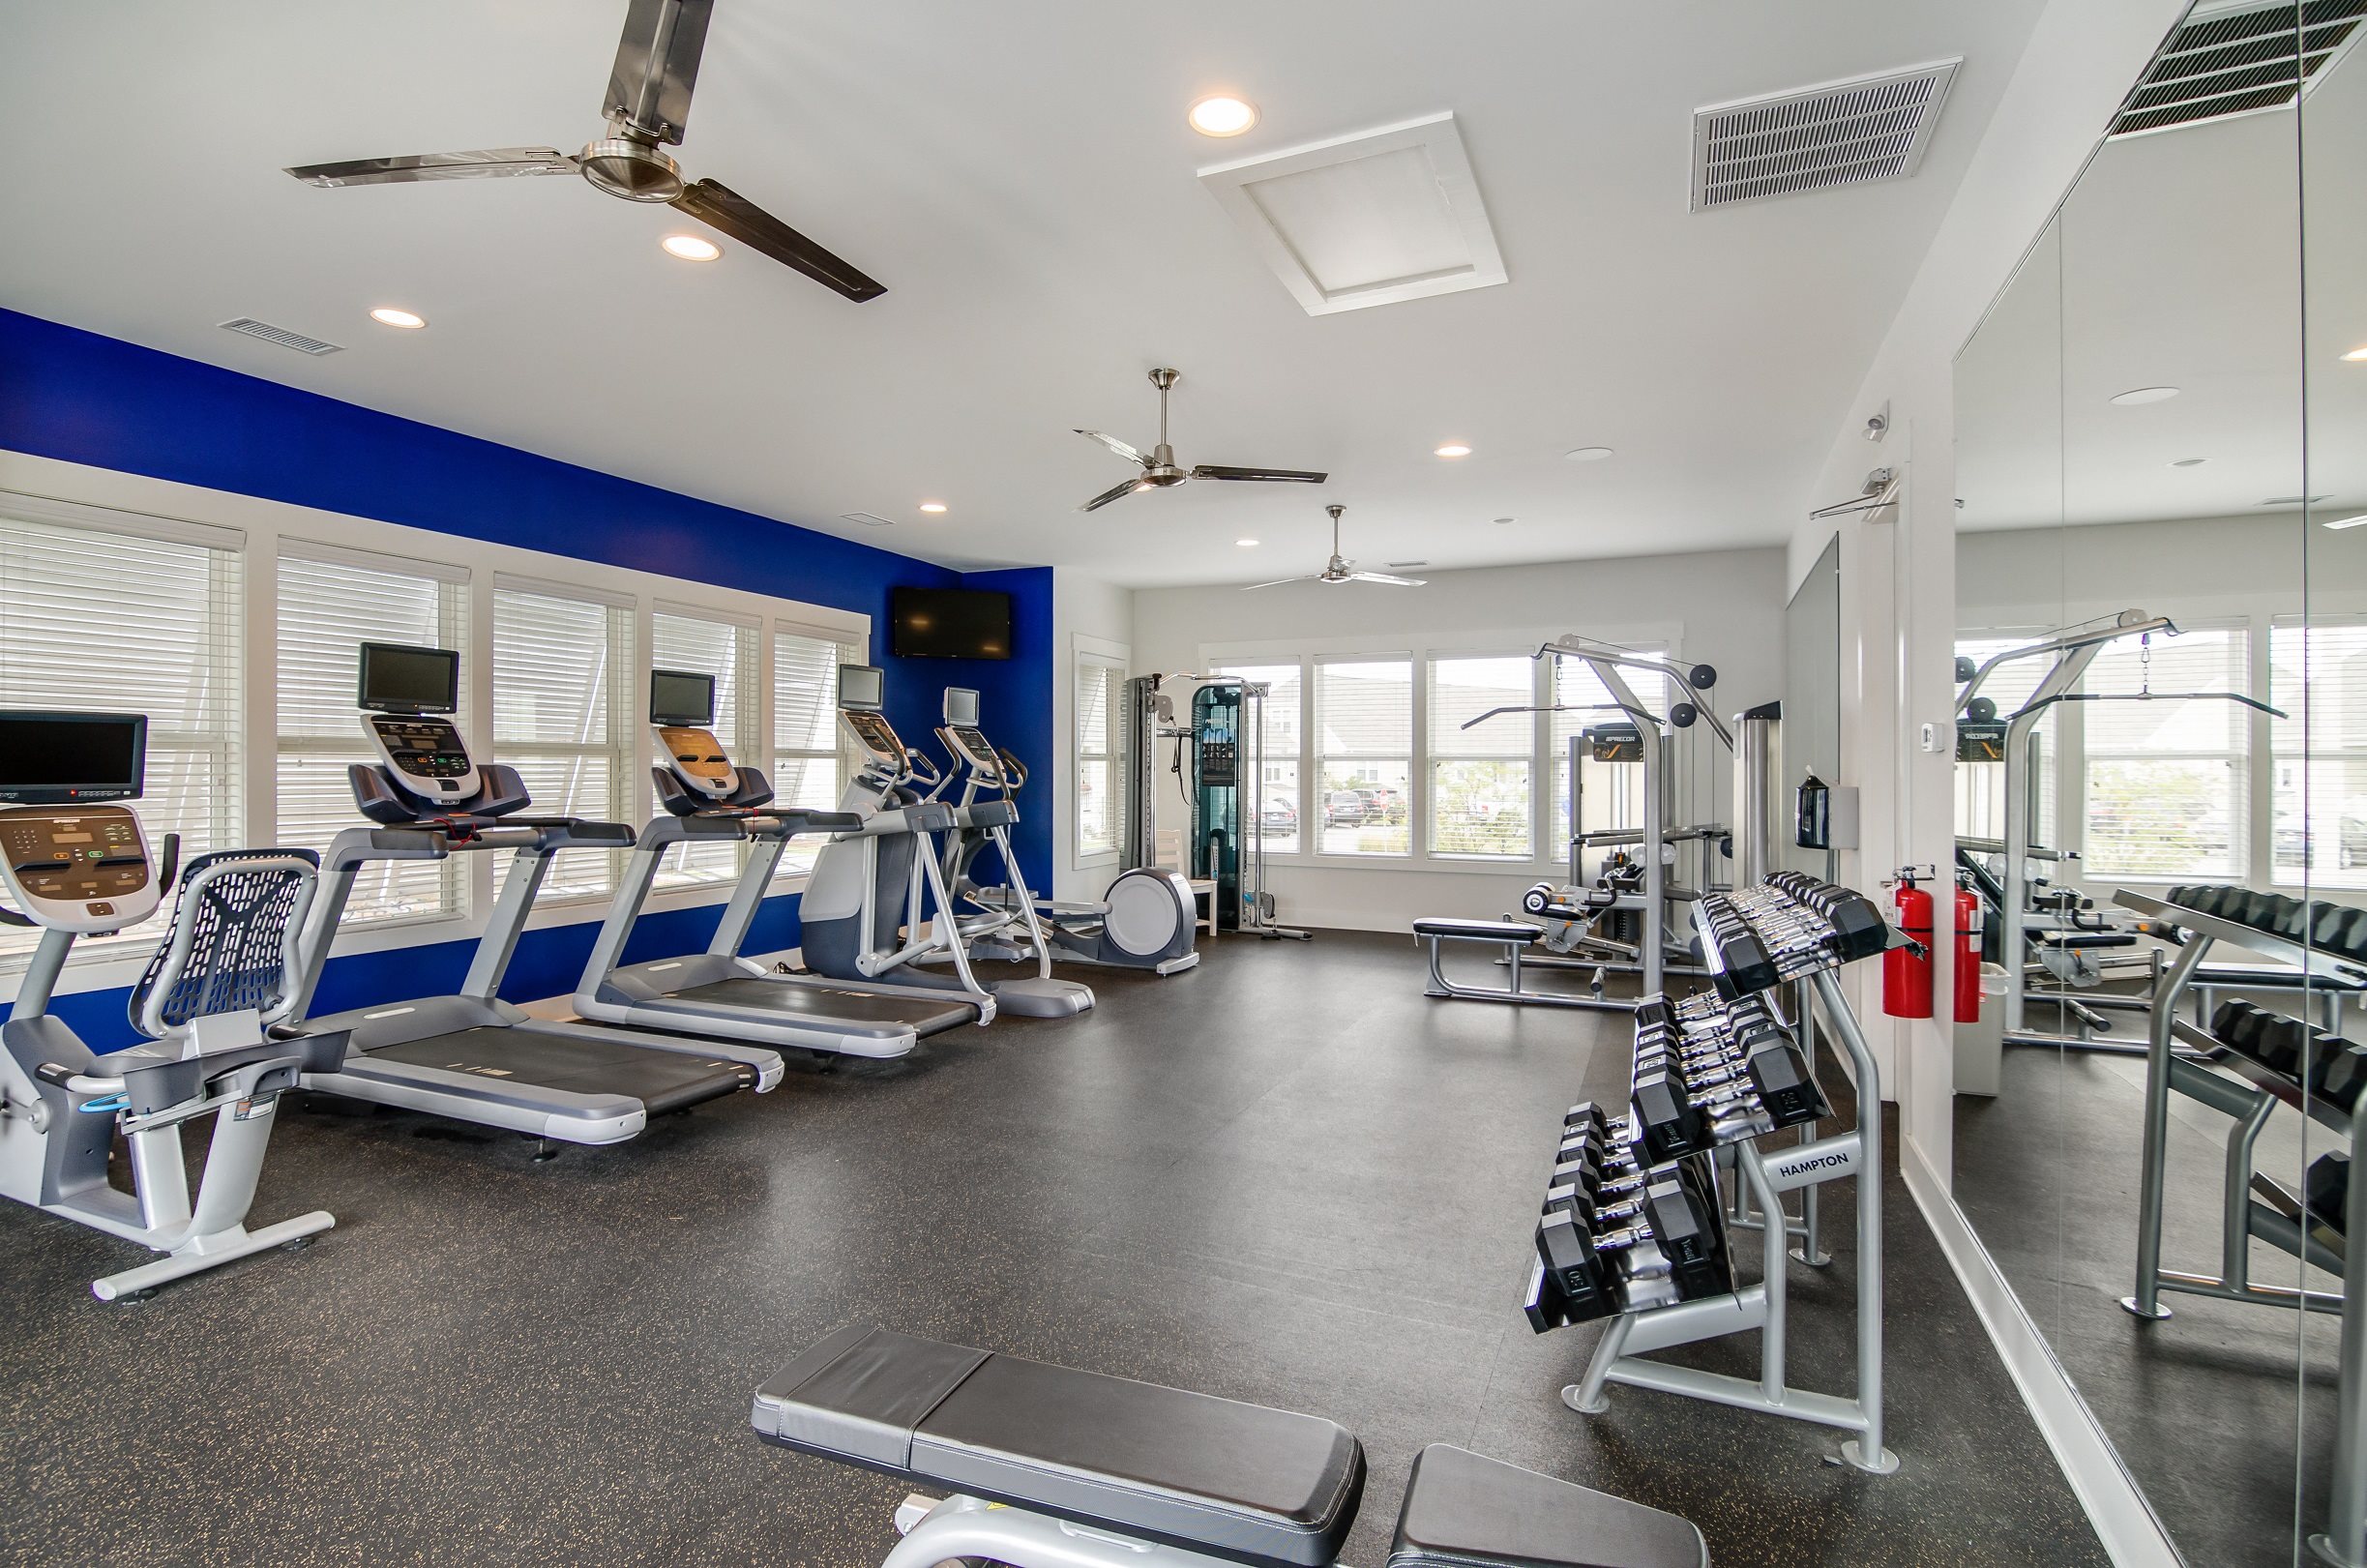 Wilmington NC Apartments for Rent - Spacious Fitness Center Featuring Various Cardio and Weight Equipment